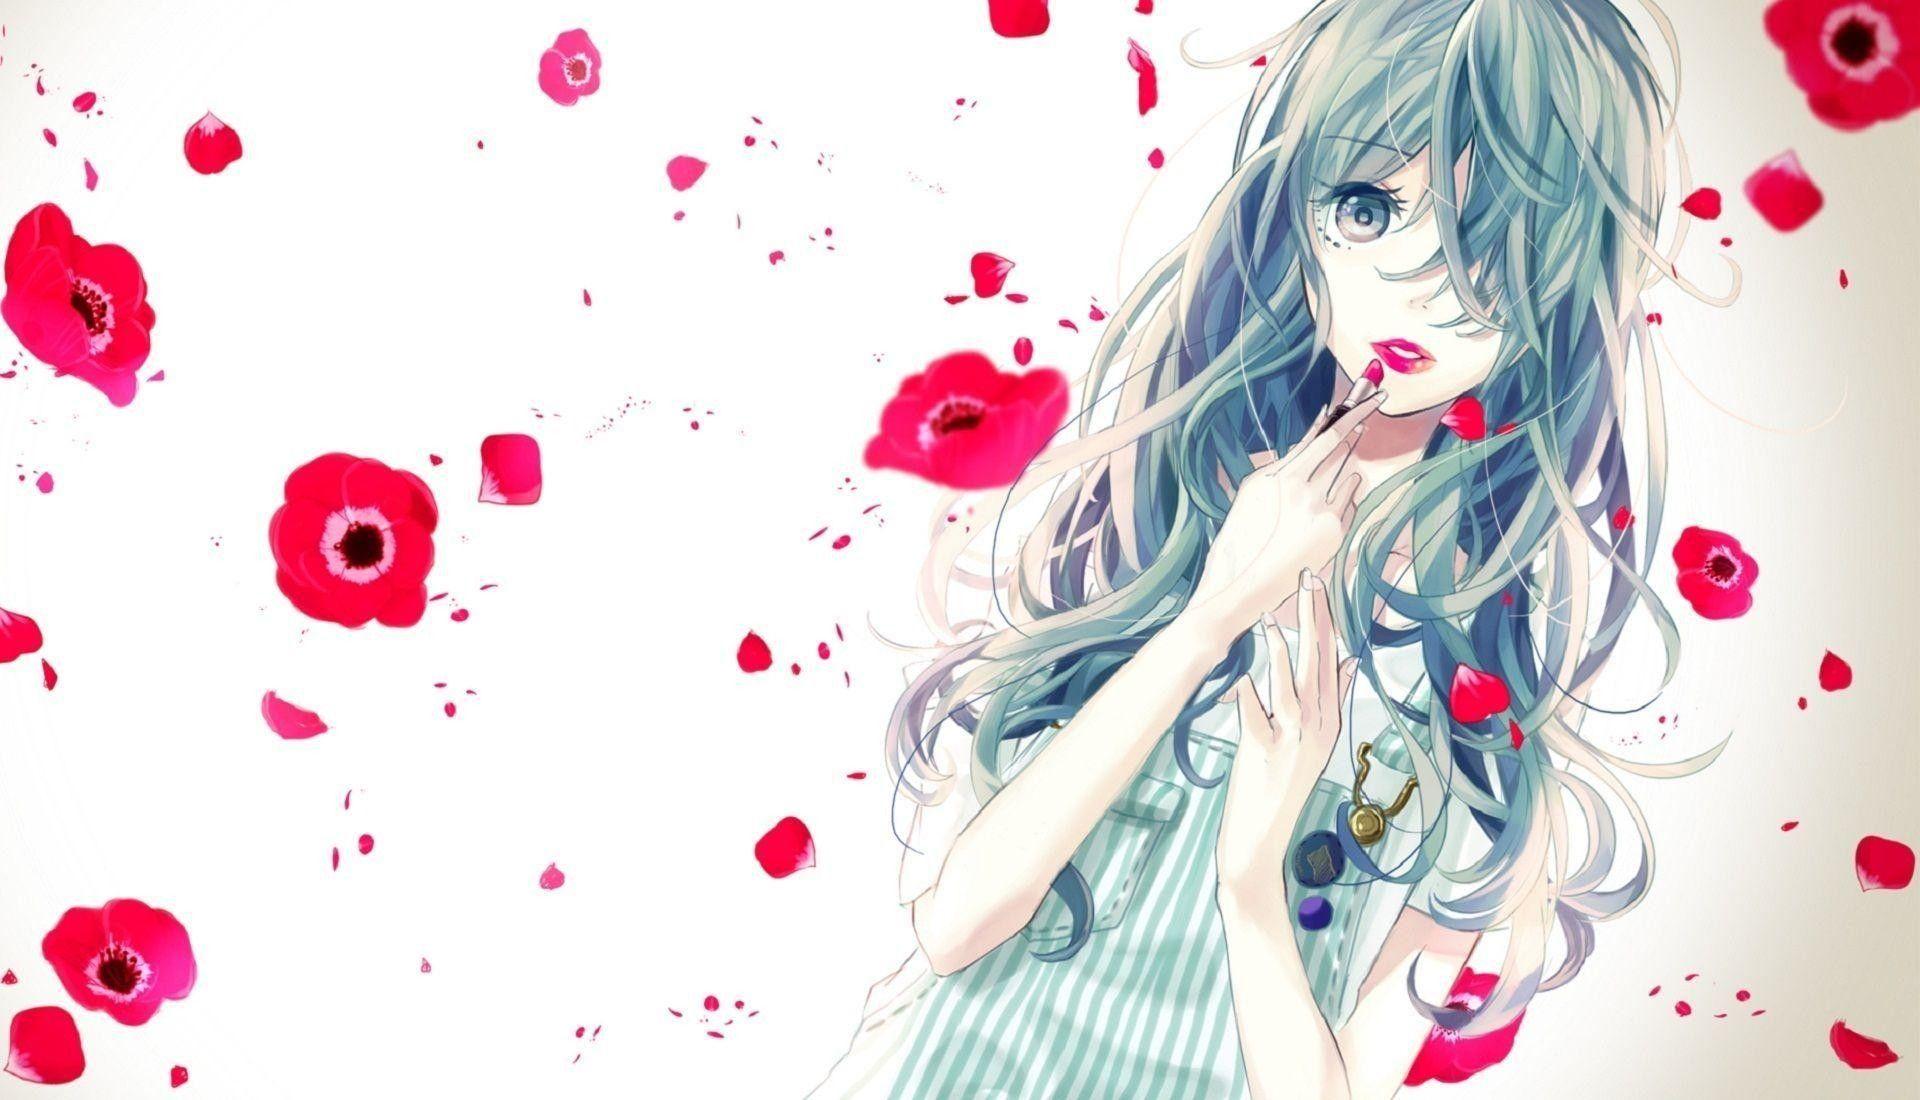 Anime Girl With Long Black Hair And Brown Eyes In Spring Background,  Nightcore Pictures Background Image And Wallpaper for Free Download